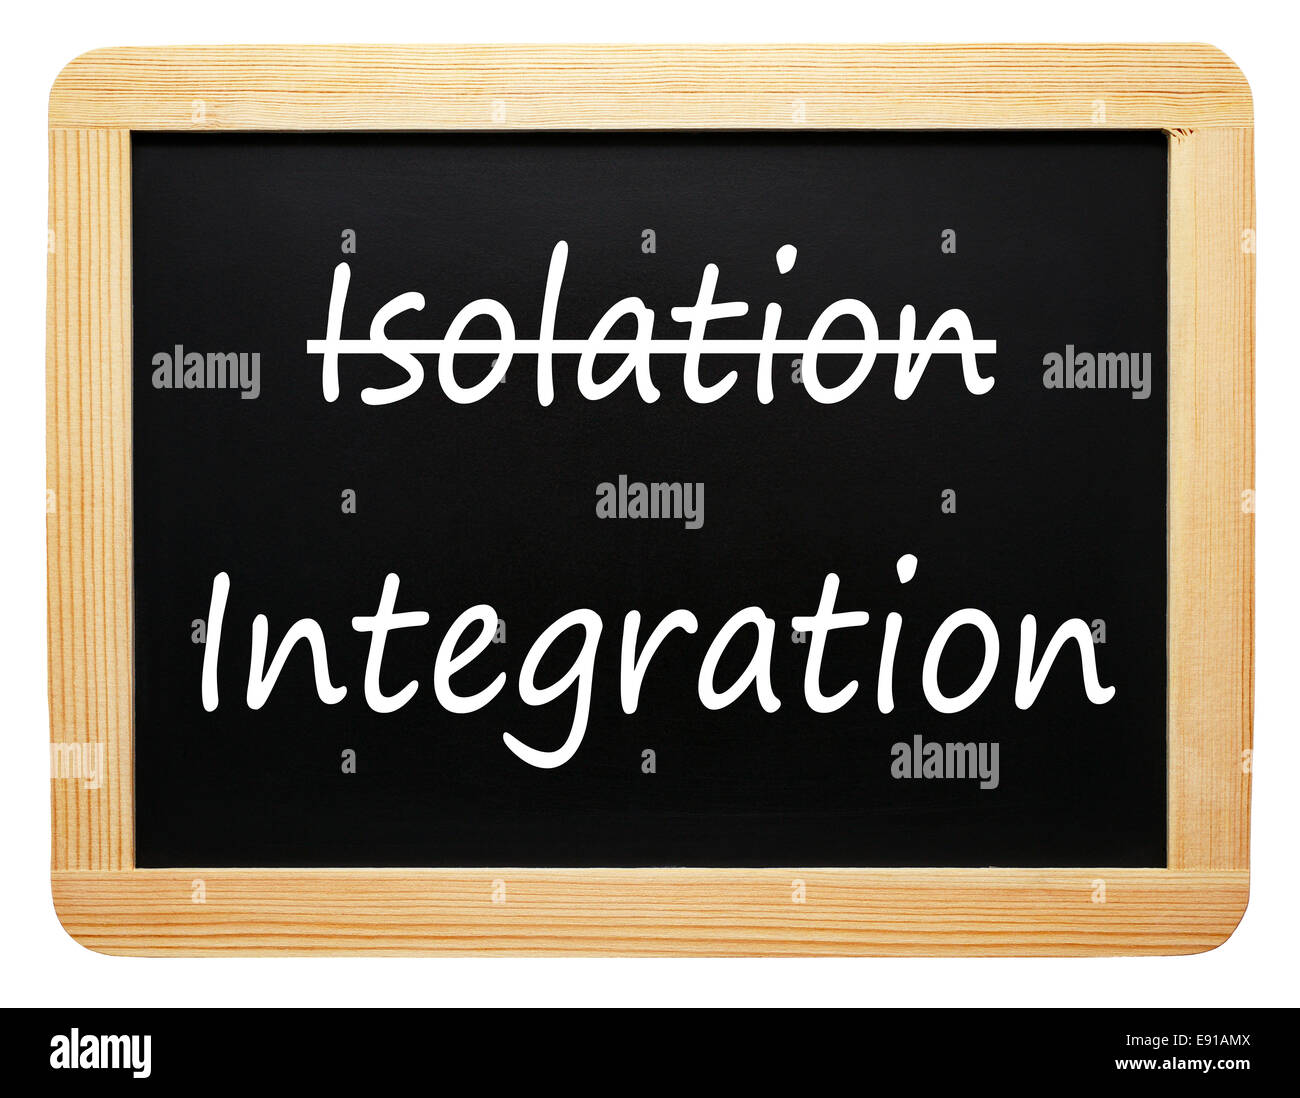 Isolation and Integration Stock Photo